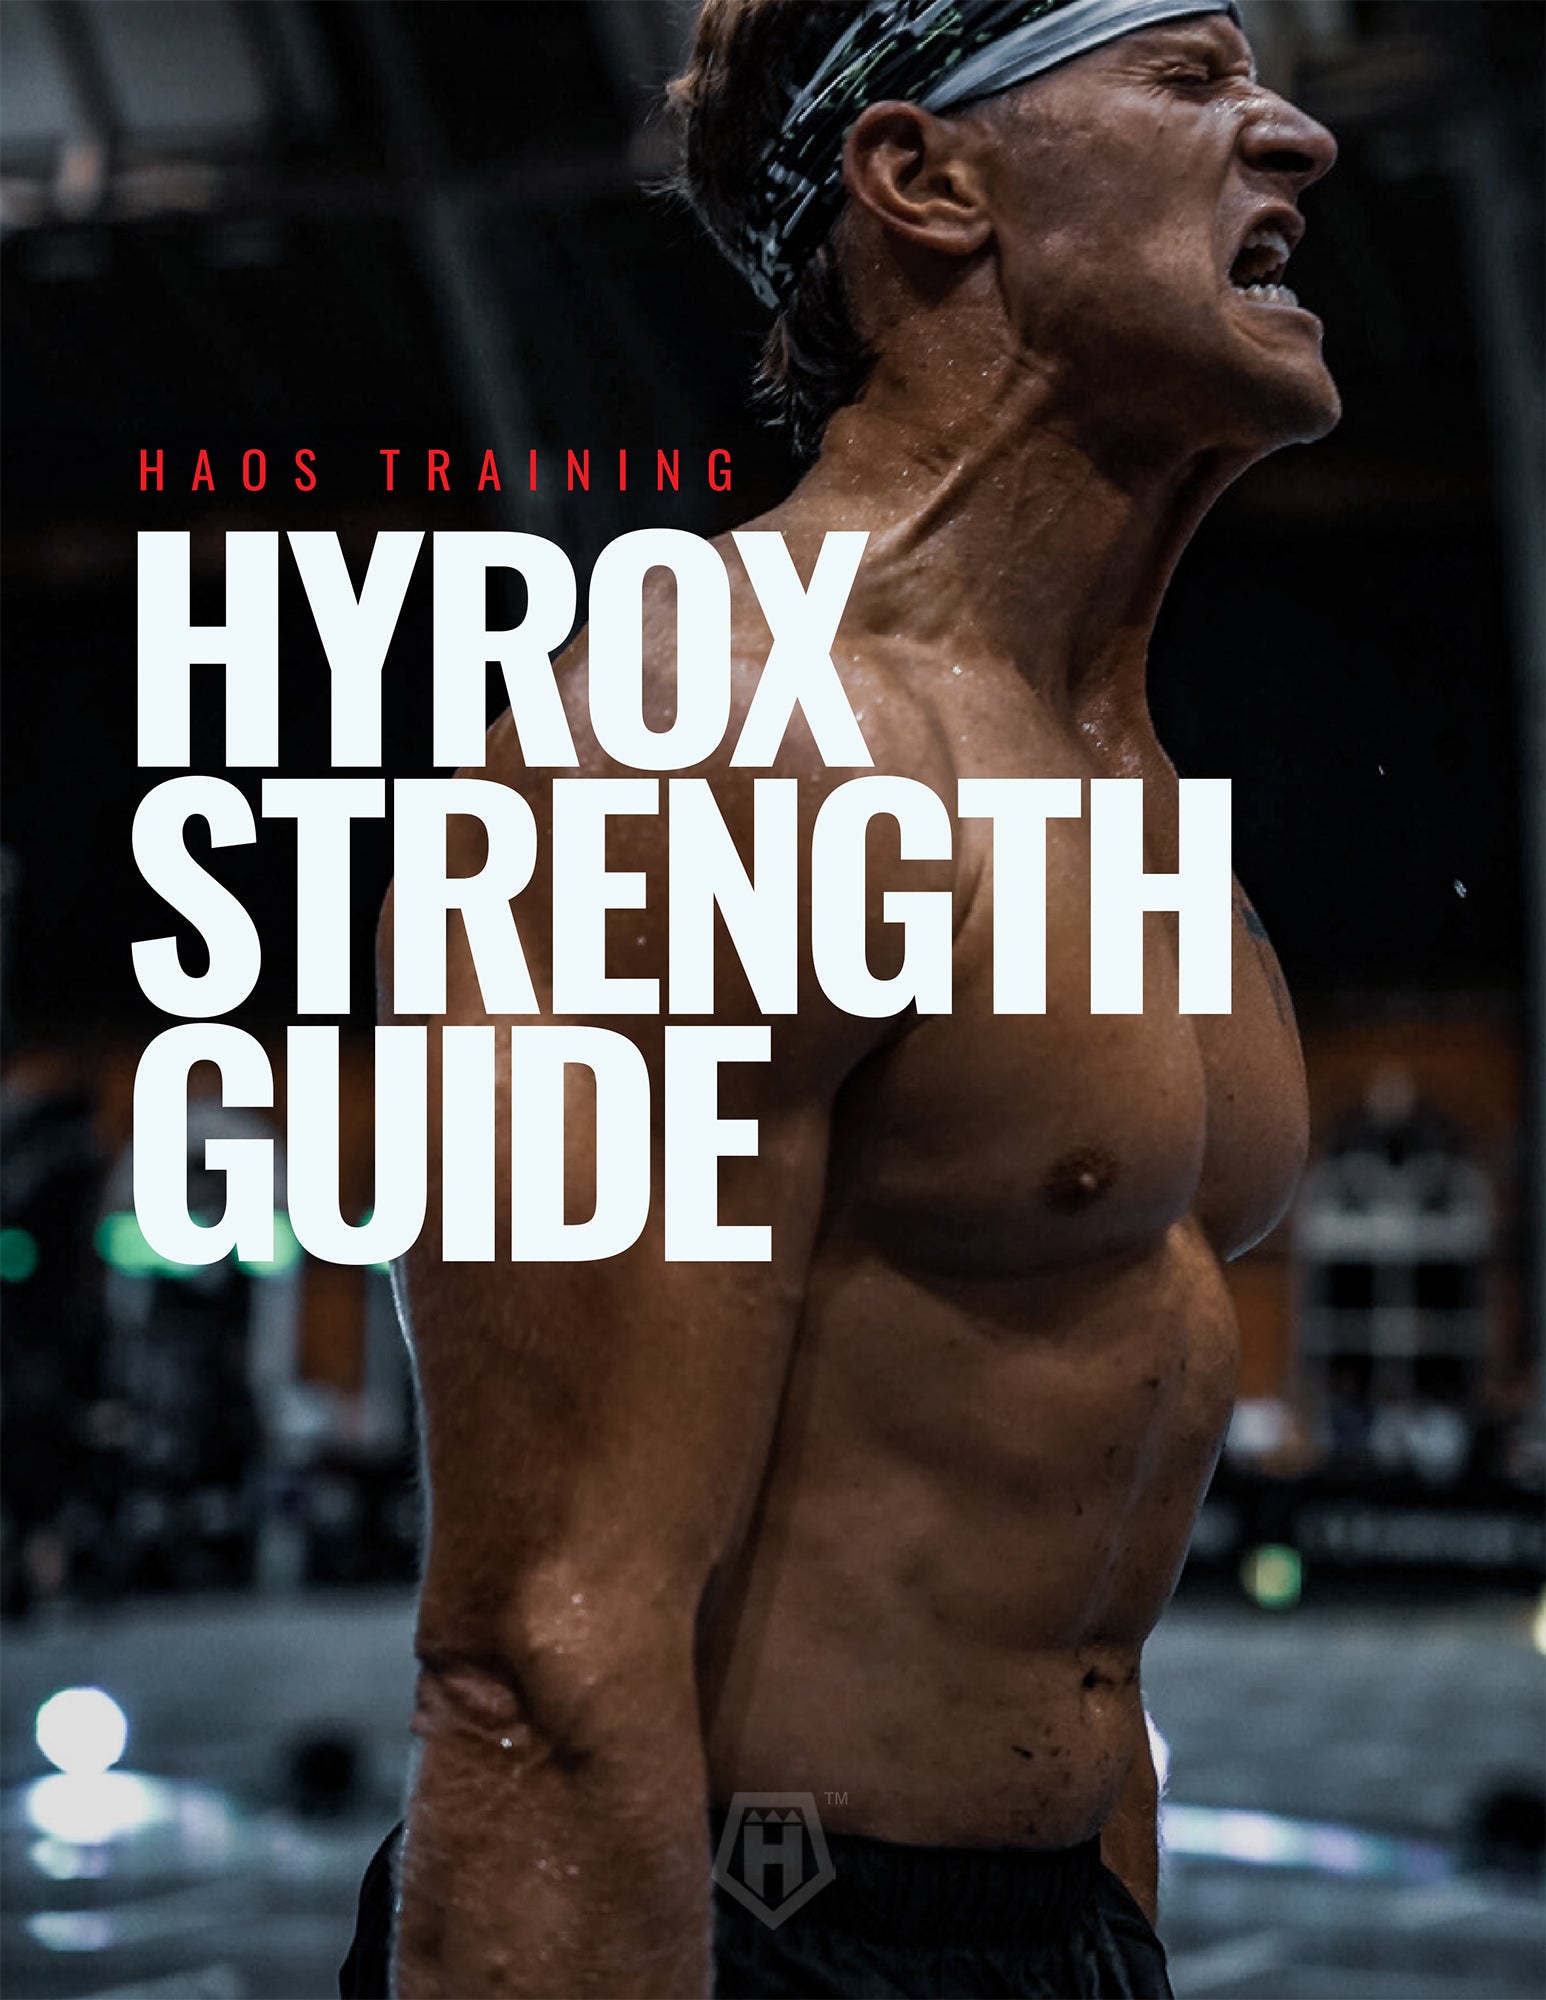 What Is Hyrox And Why Is It Becoming So Popular?